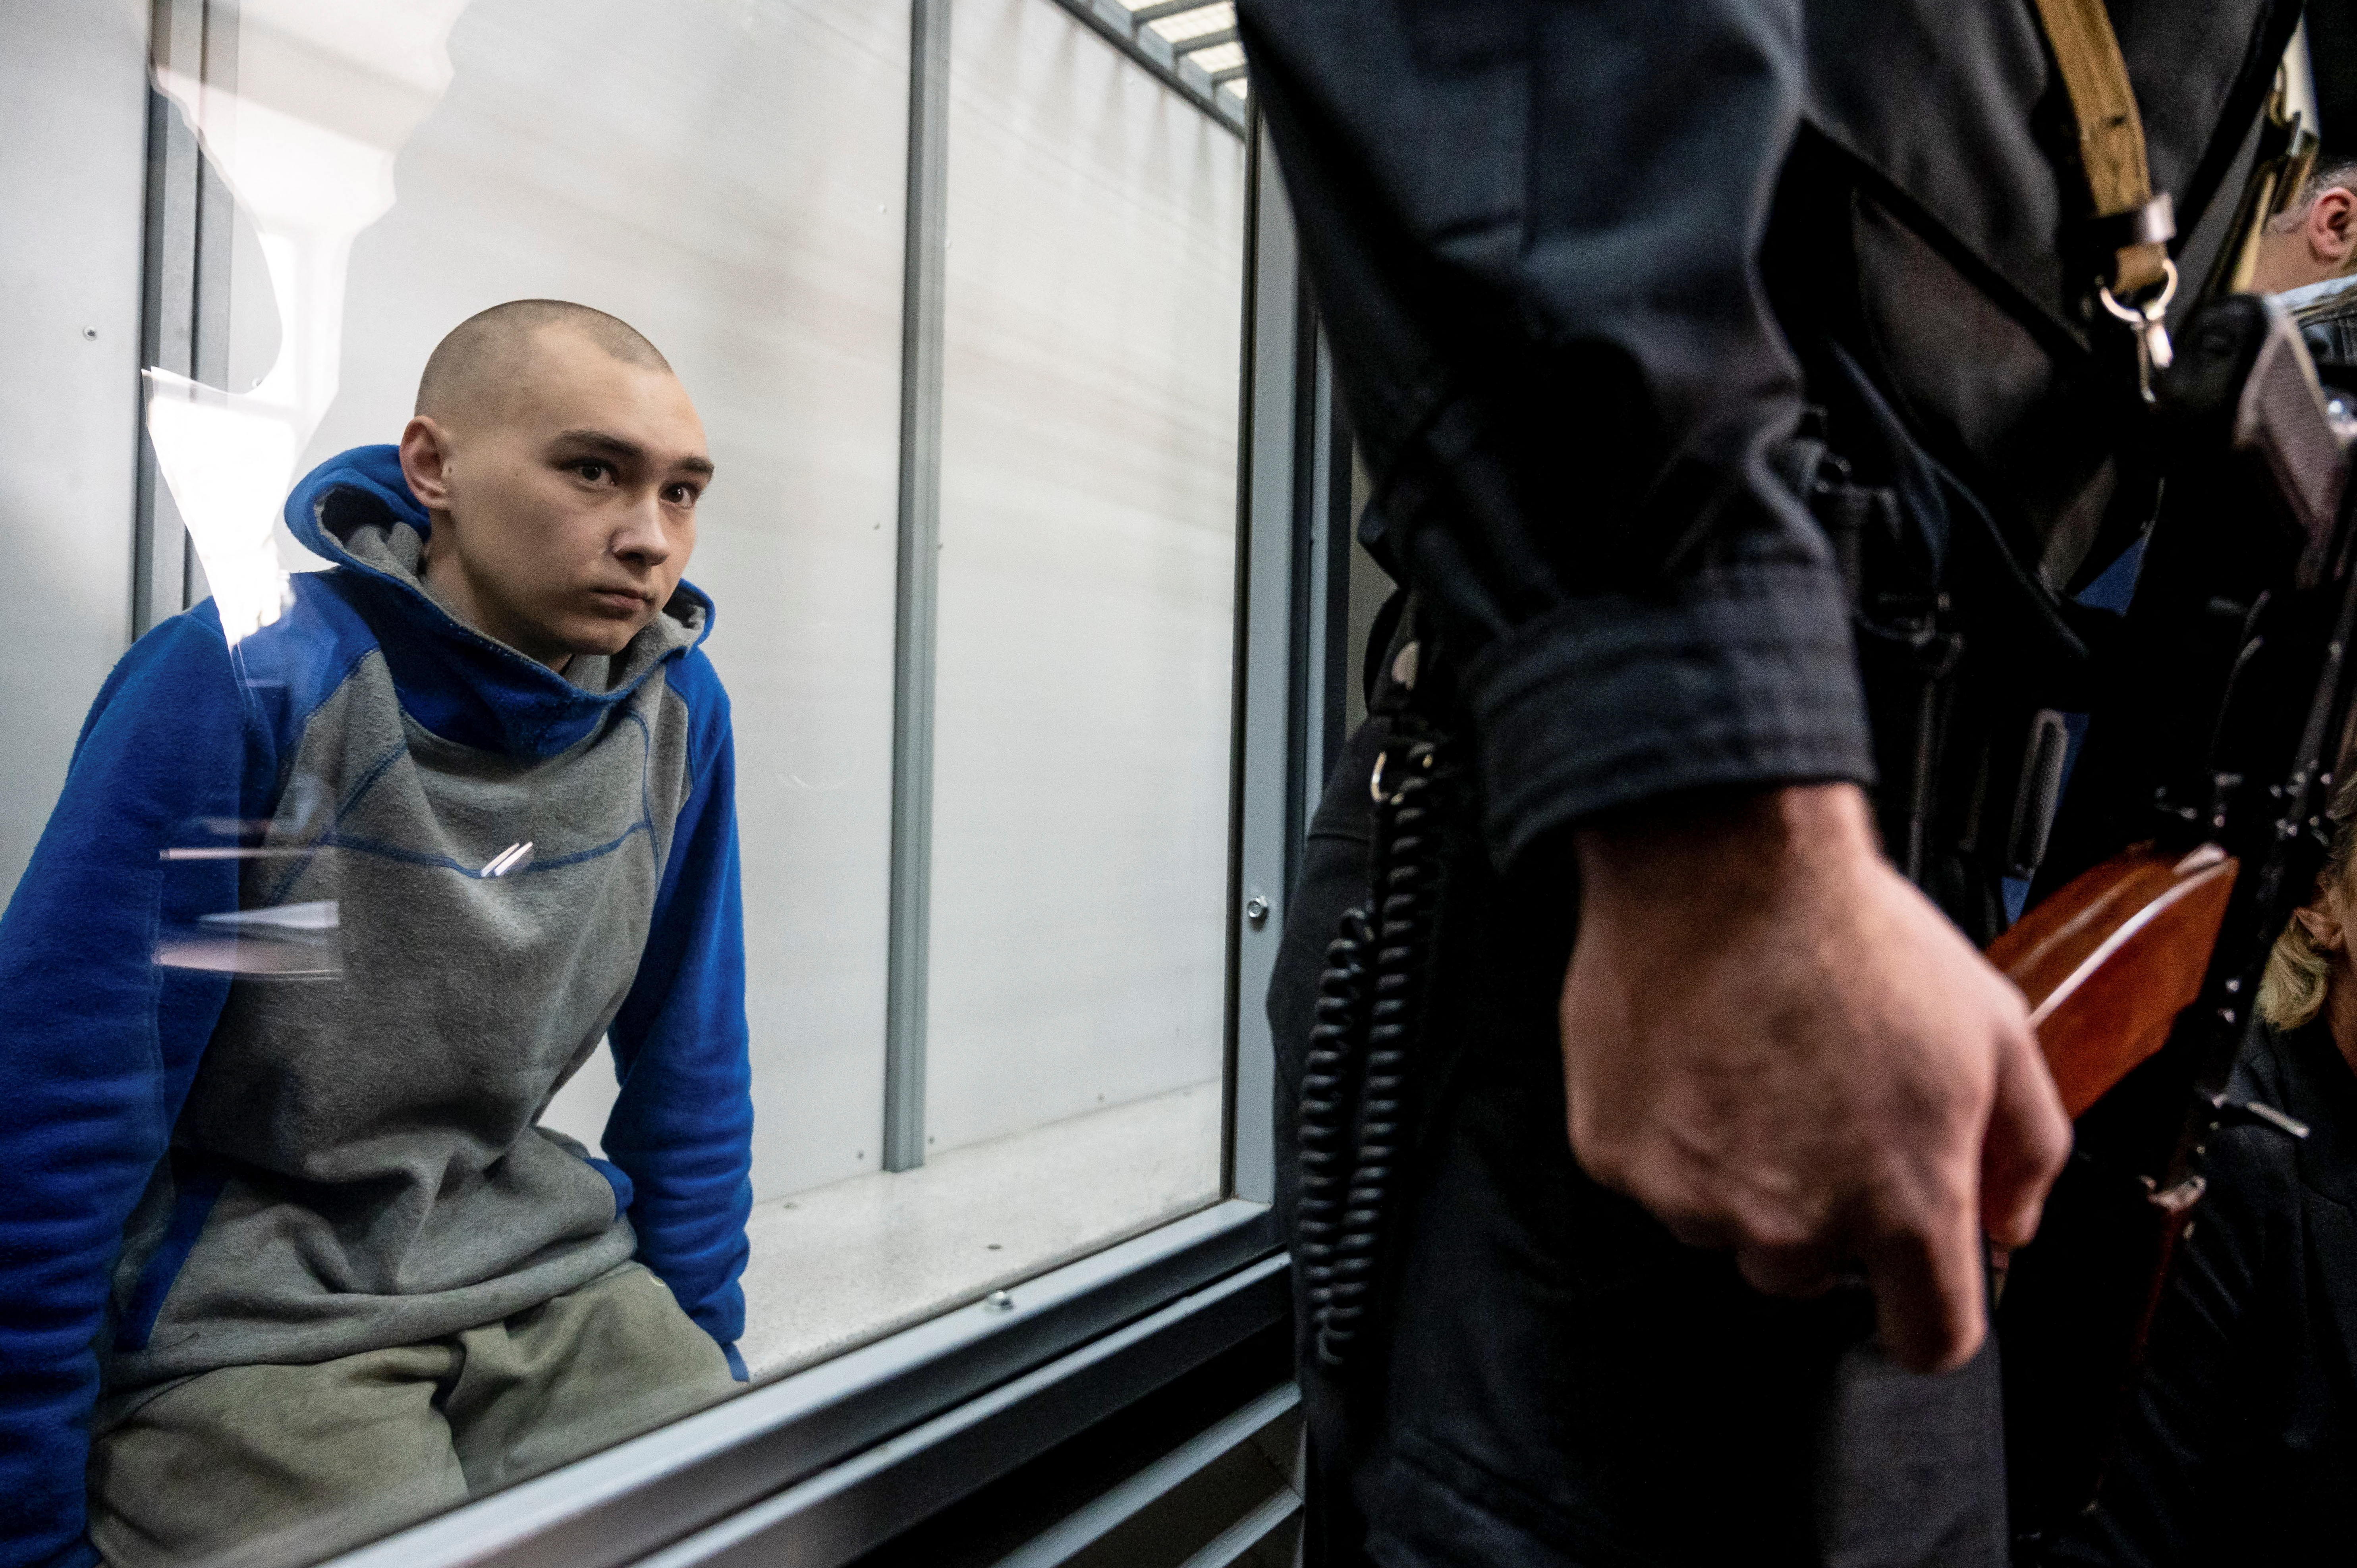 Vadim Shyshimarin, 21, is already sitting in court to determine whether he committed war crimes during Vladimir Putin's ordered invasion of Ukraine (Reuters)